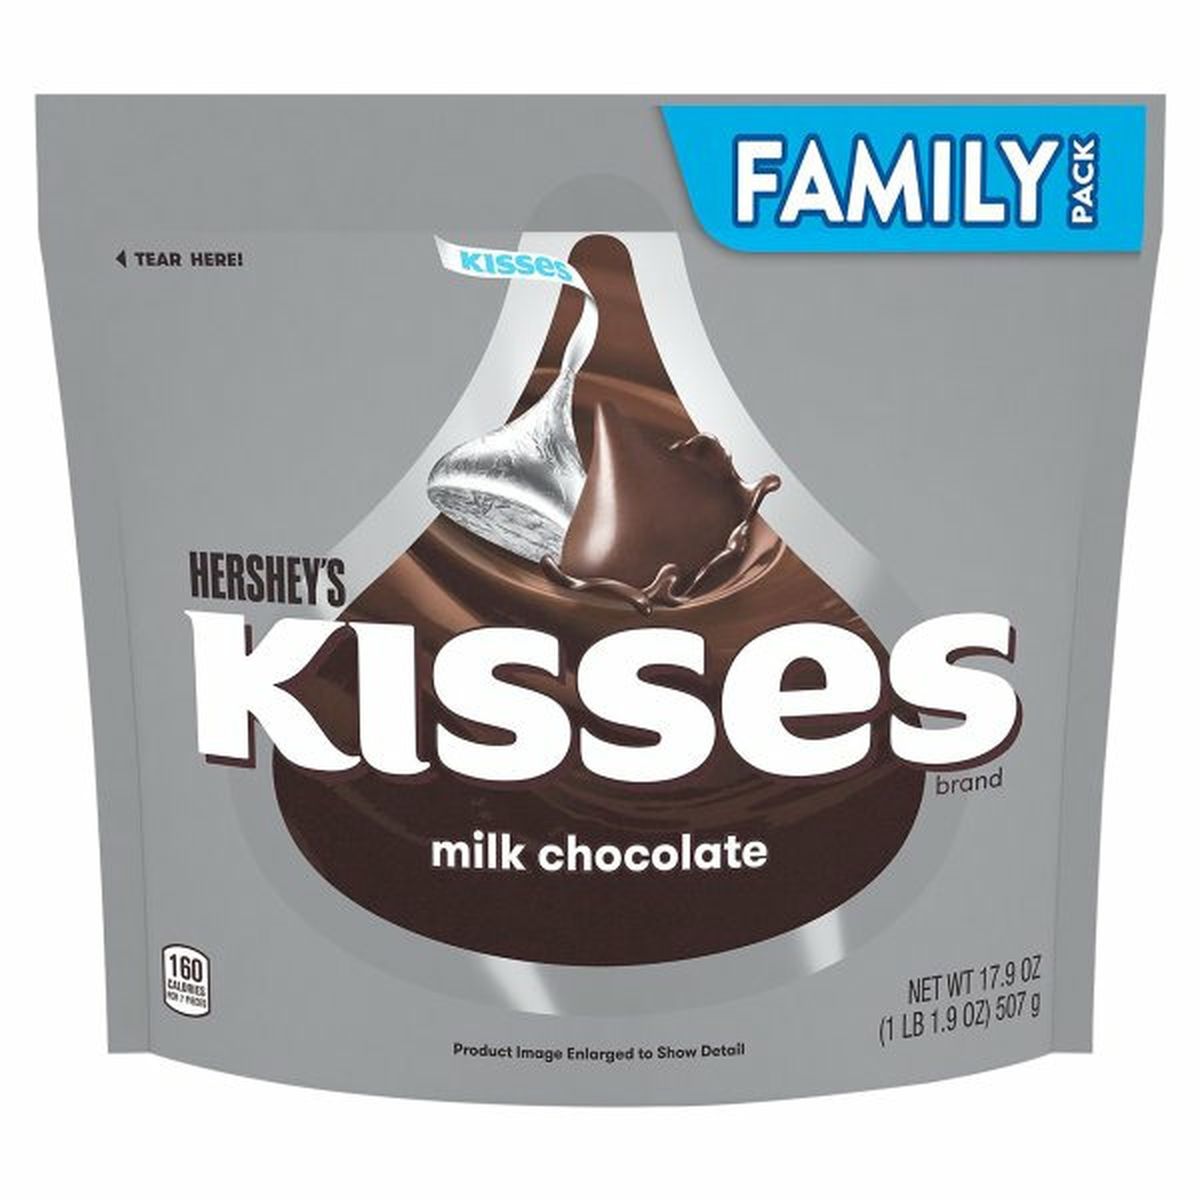 Calories in HERSHEY'S KISSES Milk Chocolate, Family Pack